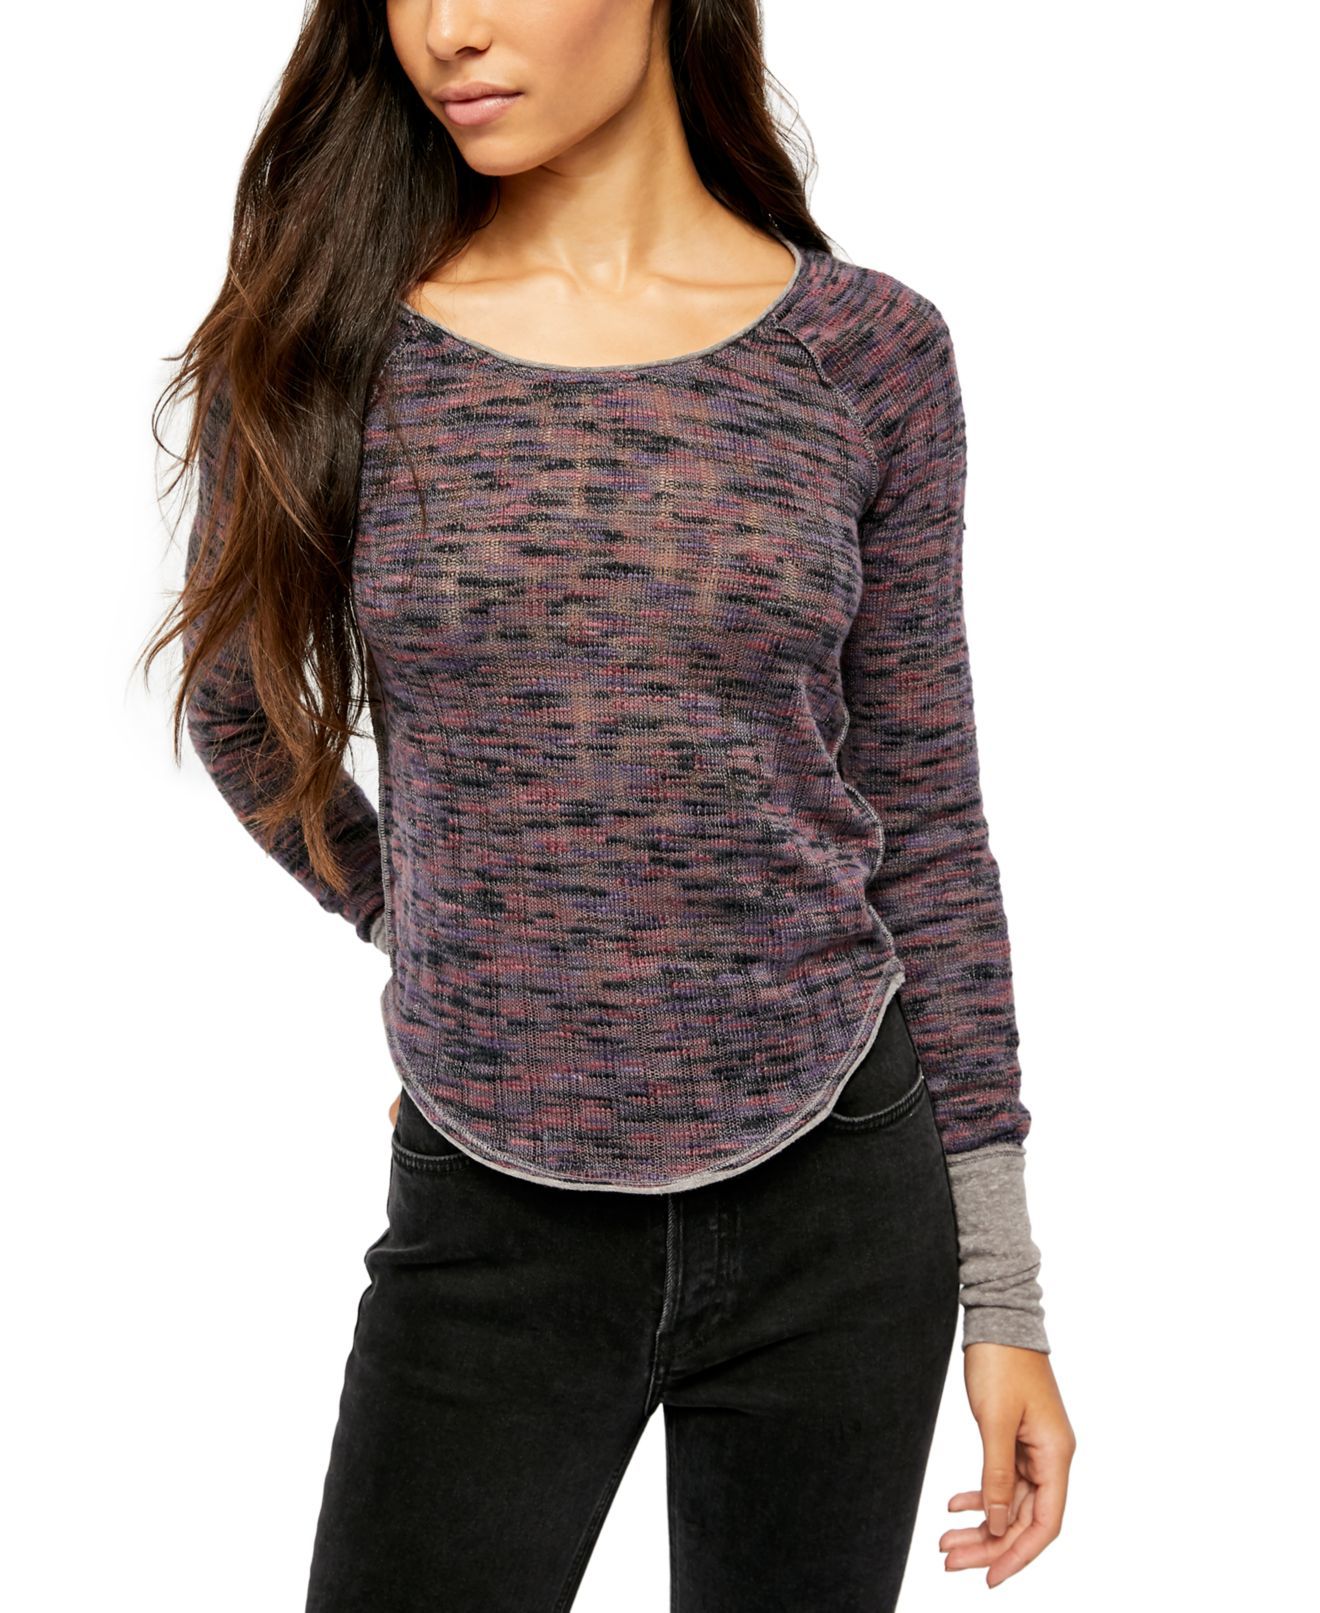 Color: Purples Size Type: Regular Size (Women's): XS Sleeve Length: Long Sleeve Type: Blouse Style: Knit Top Neckline: Round Neck Pattern: Geometric Theme: Modern Material: Cotton Blends